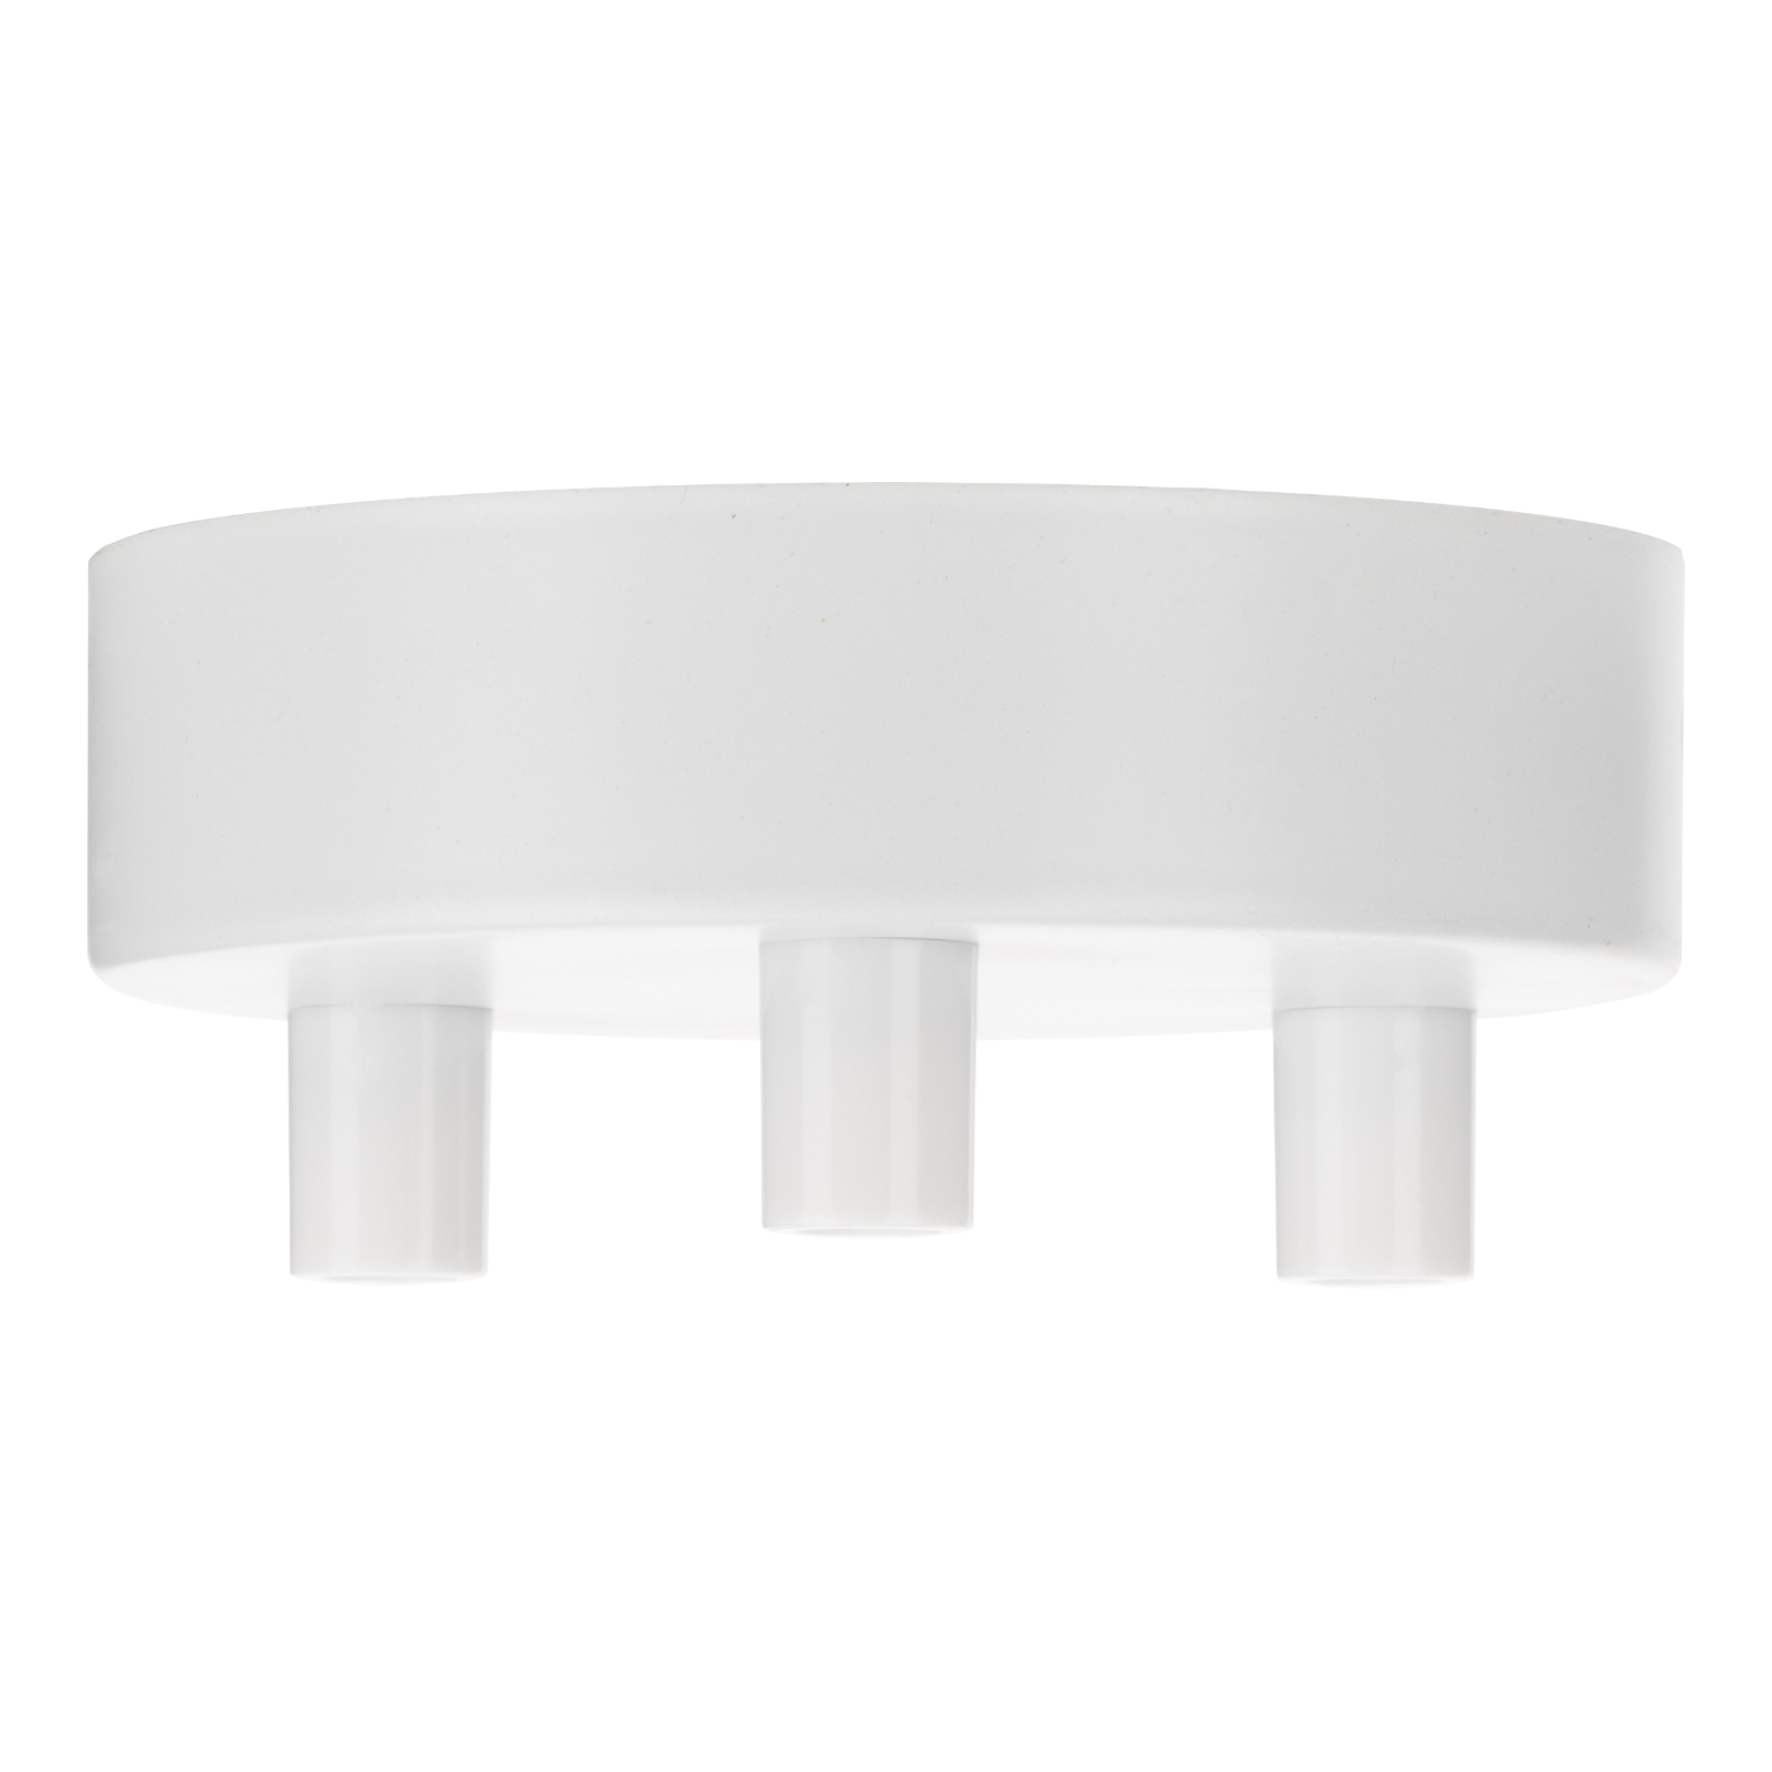 Ceiling Cup Metal White Multi-Cord 3